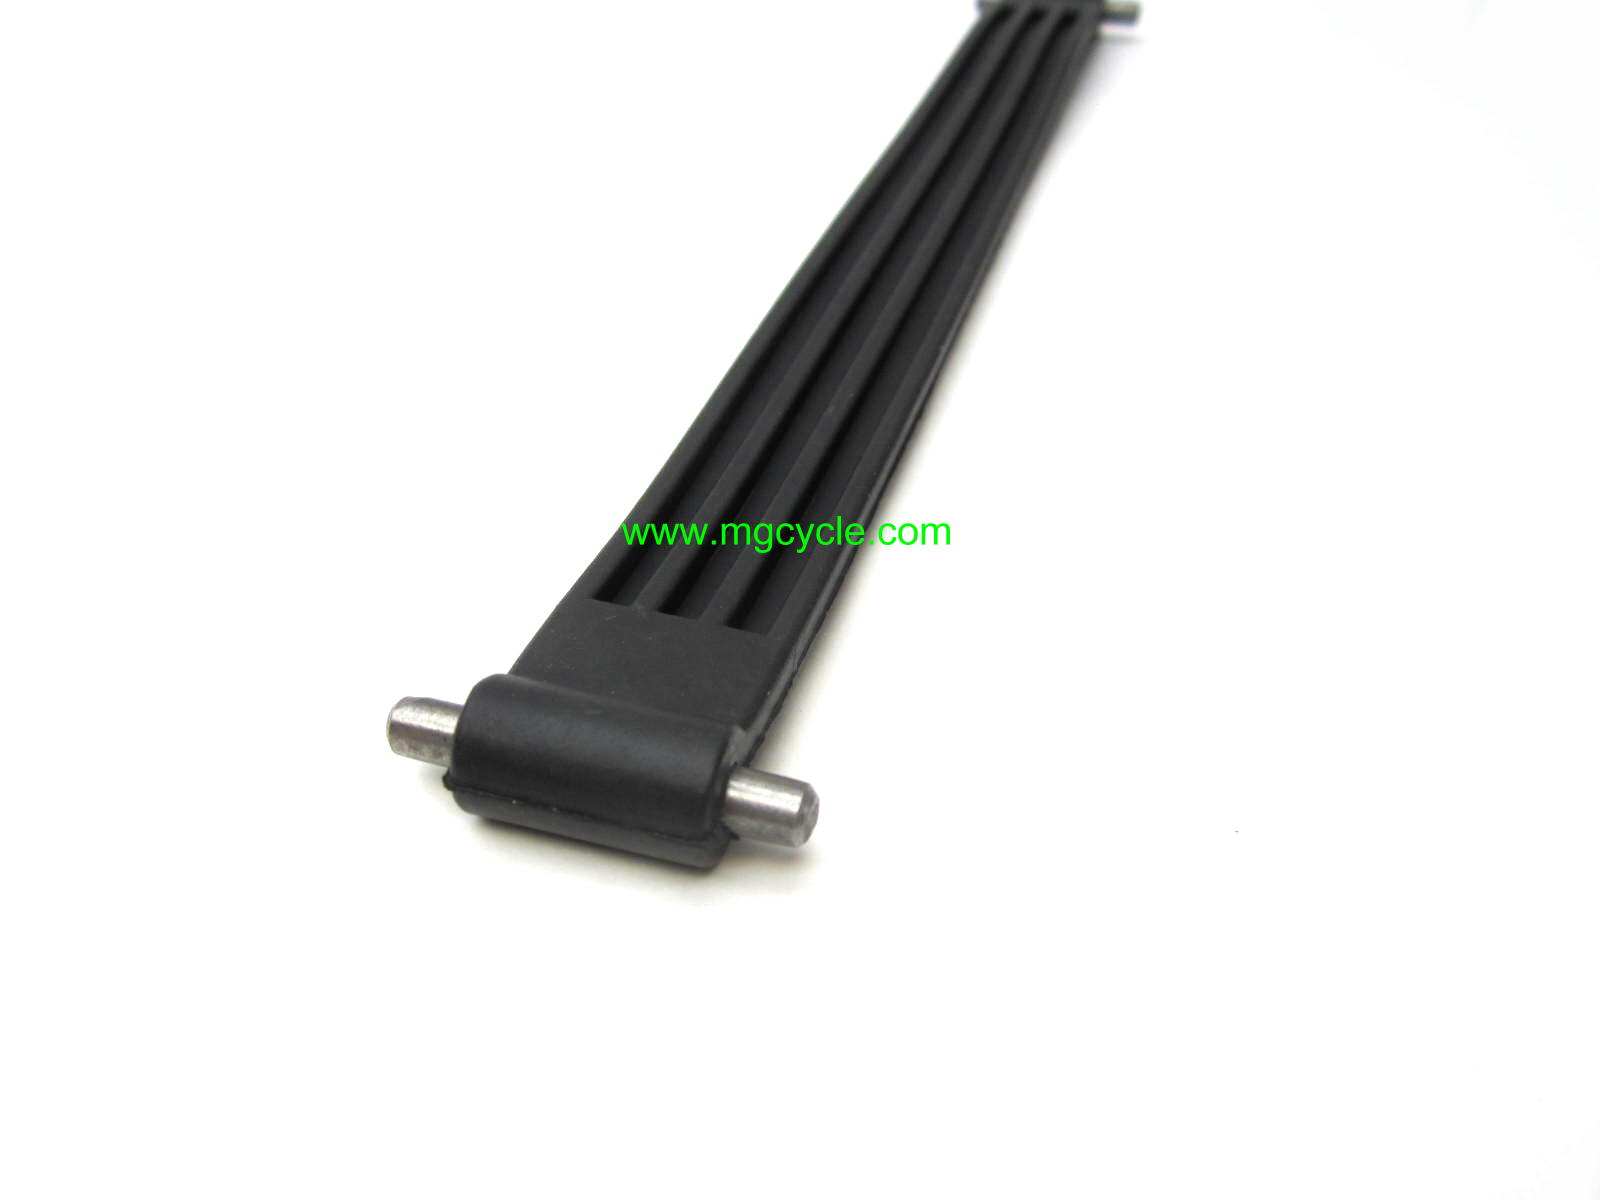 Battery strap for most Ducati bevel twins ~270mm long 069891900